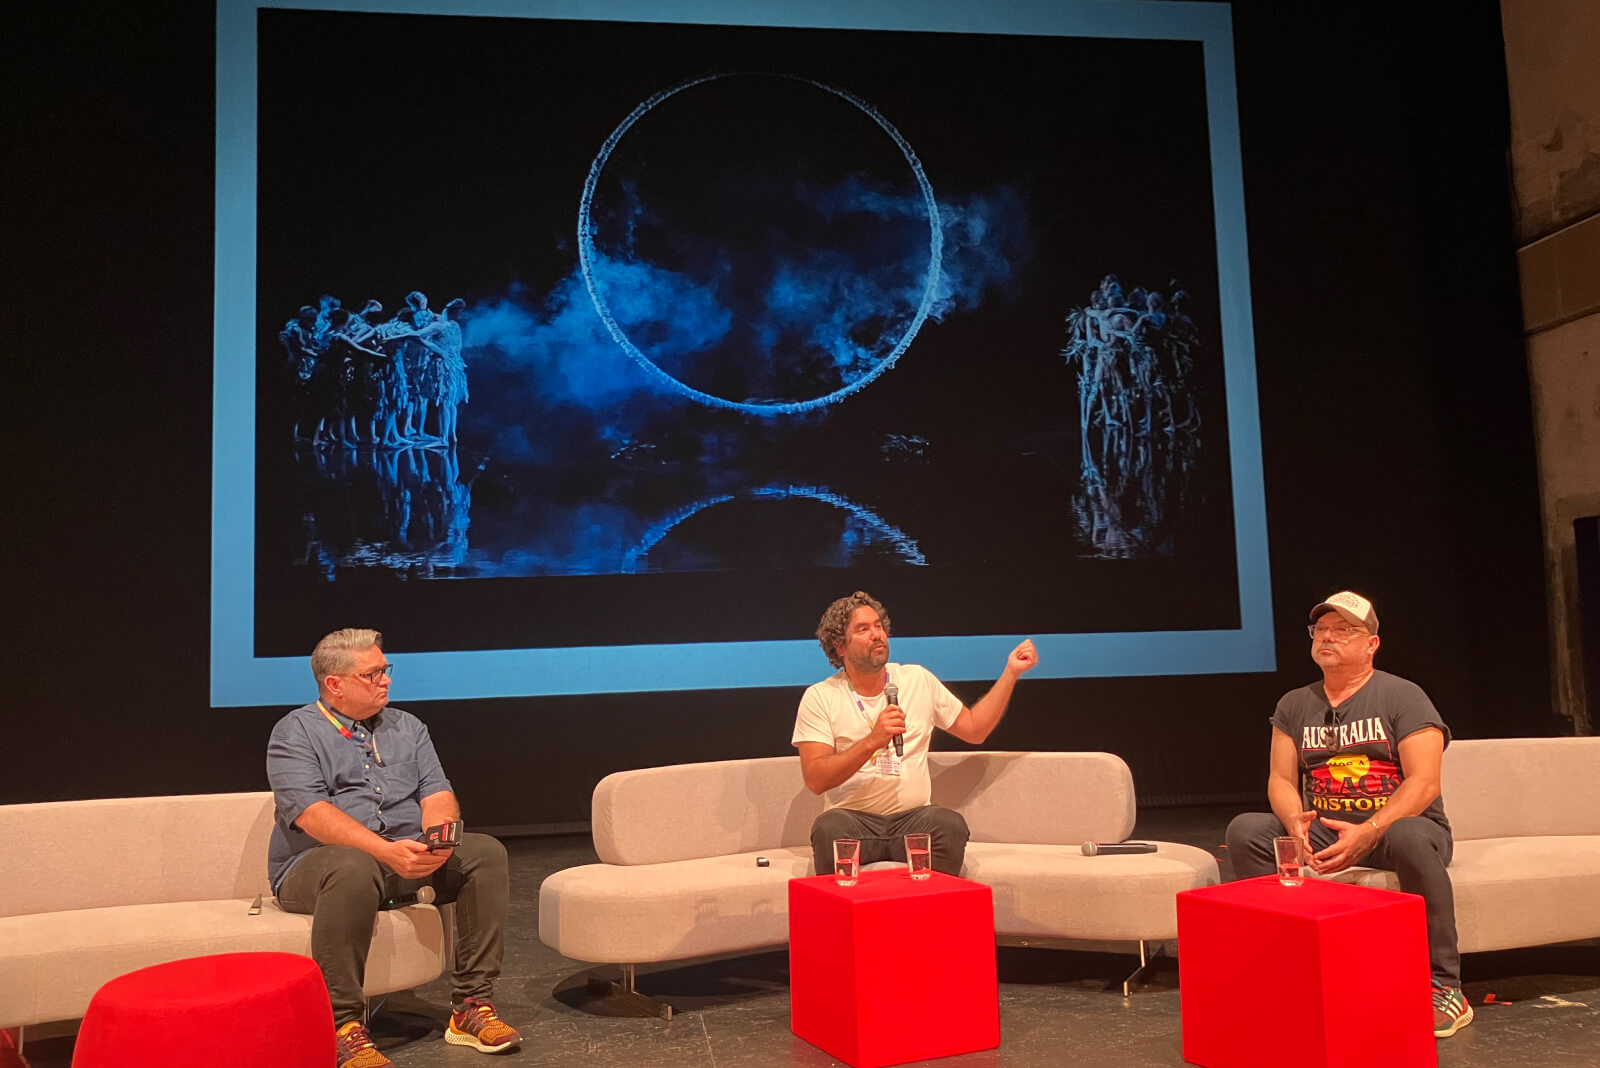 Jacob Nash, Wesley Enoch and Stephen Page in the panel discussion Local Global perspectives on Indigenous Materialities of Performance. The image shown on the screen was of the circular structure from Bangarra's production of Bennelong (2017) that formed a key part of the Australian exhibit.